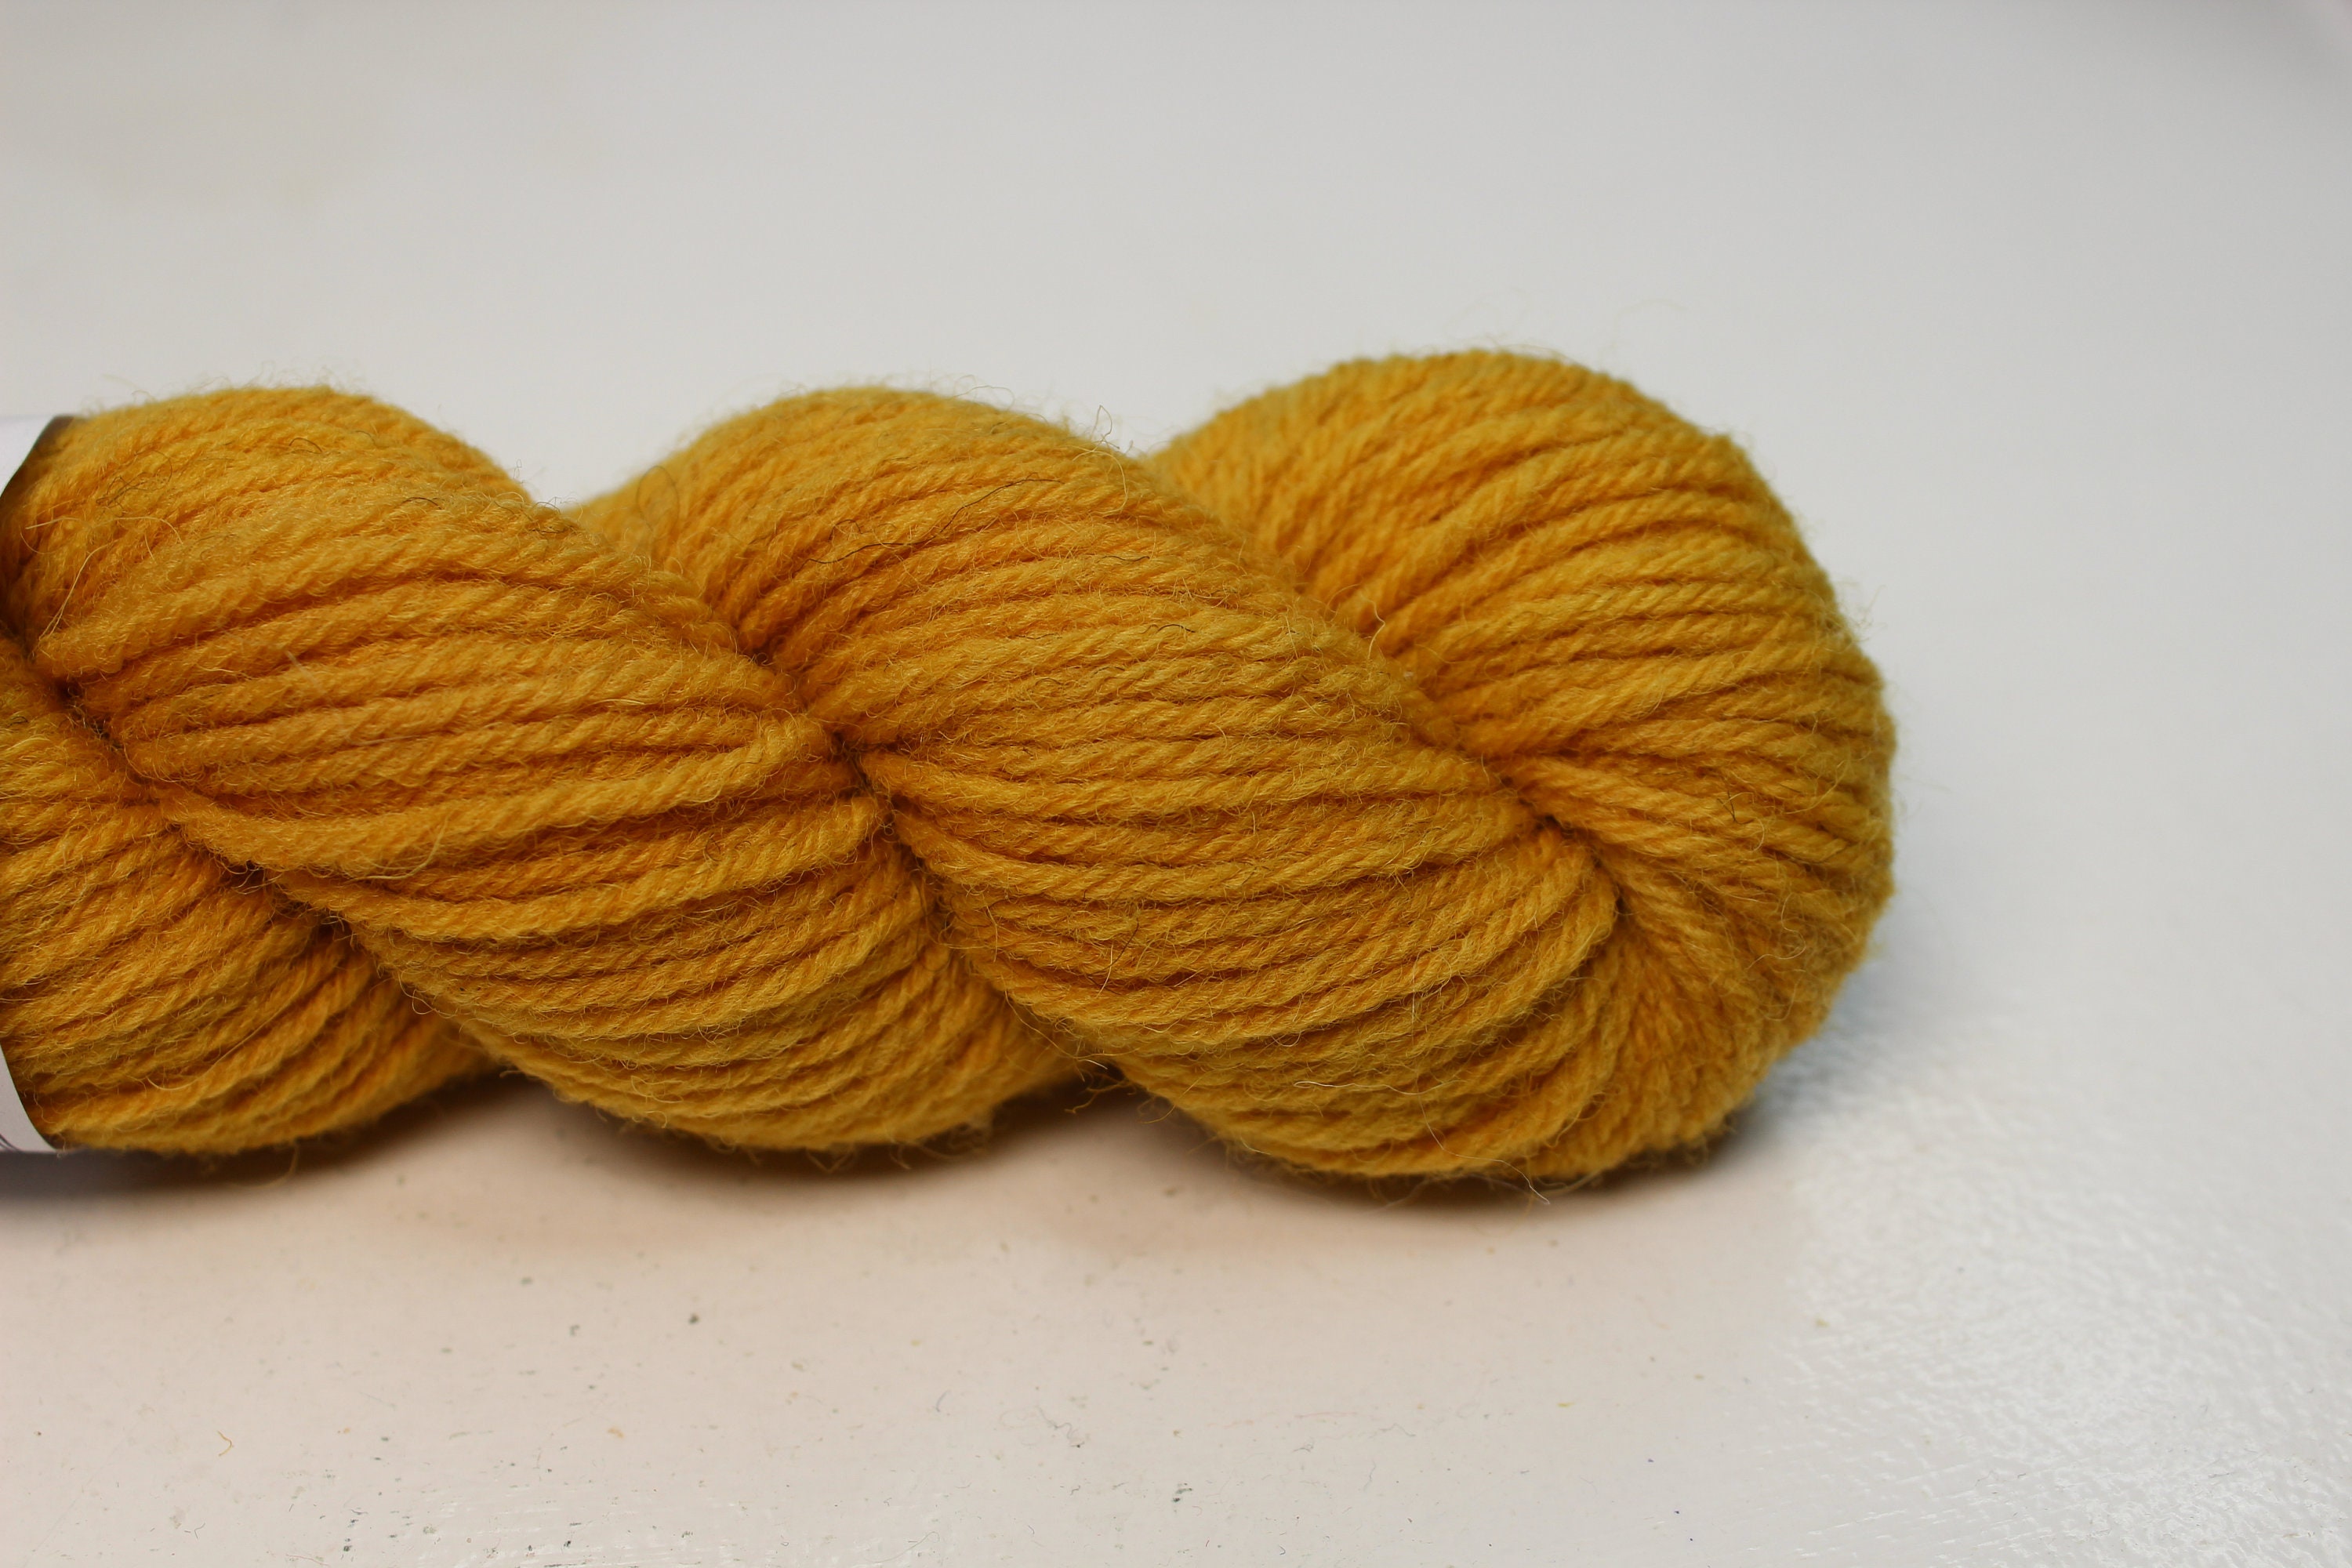 Firecrest hand dyed with onion skins Pure Merino Wool 4 Ply